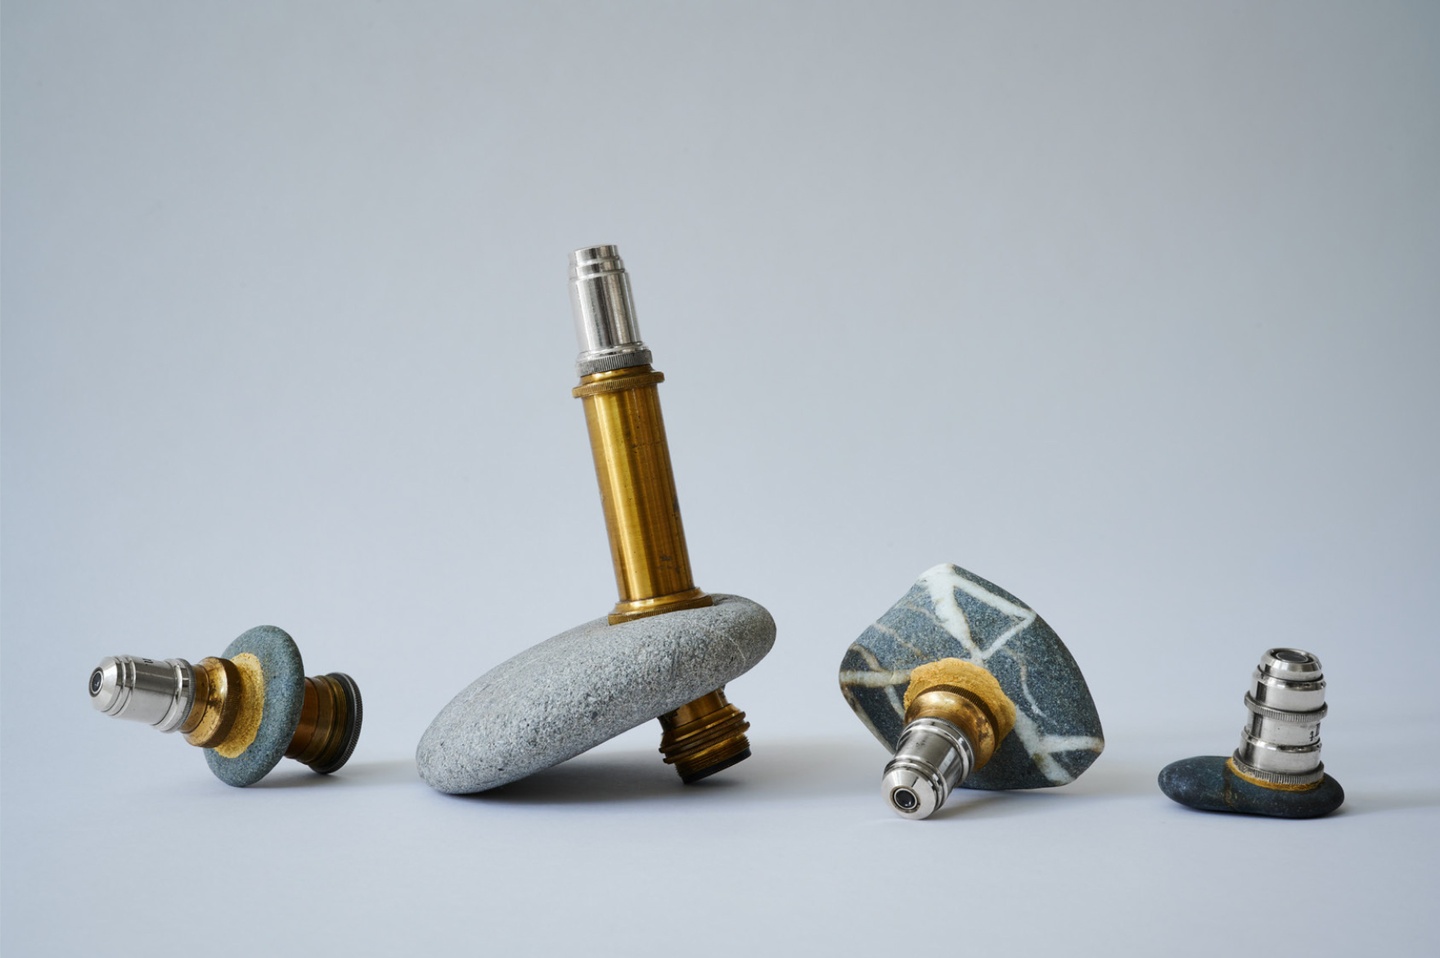 Set of four naturally holed gray hag stones surrounding small silver-and-gold objects.